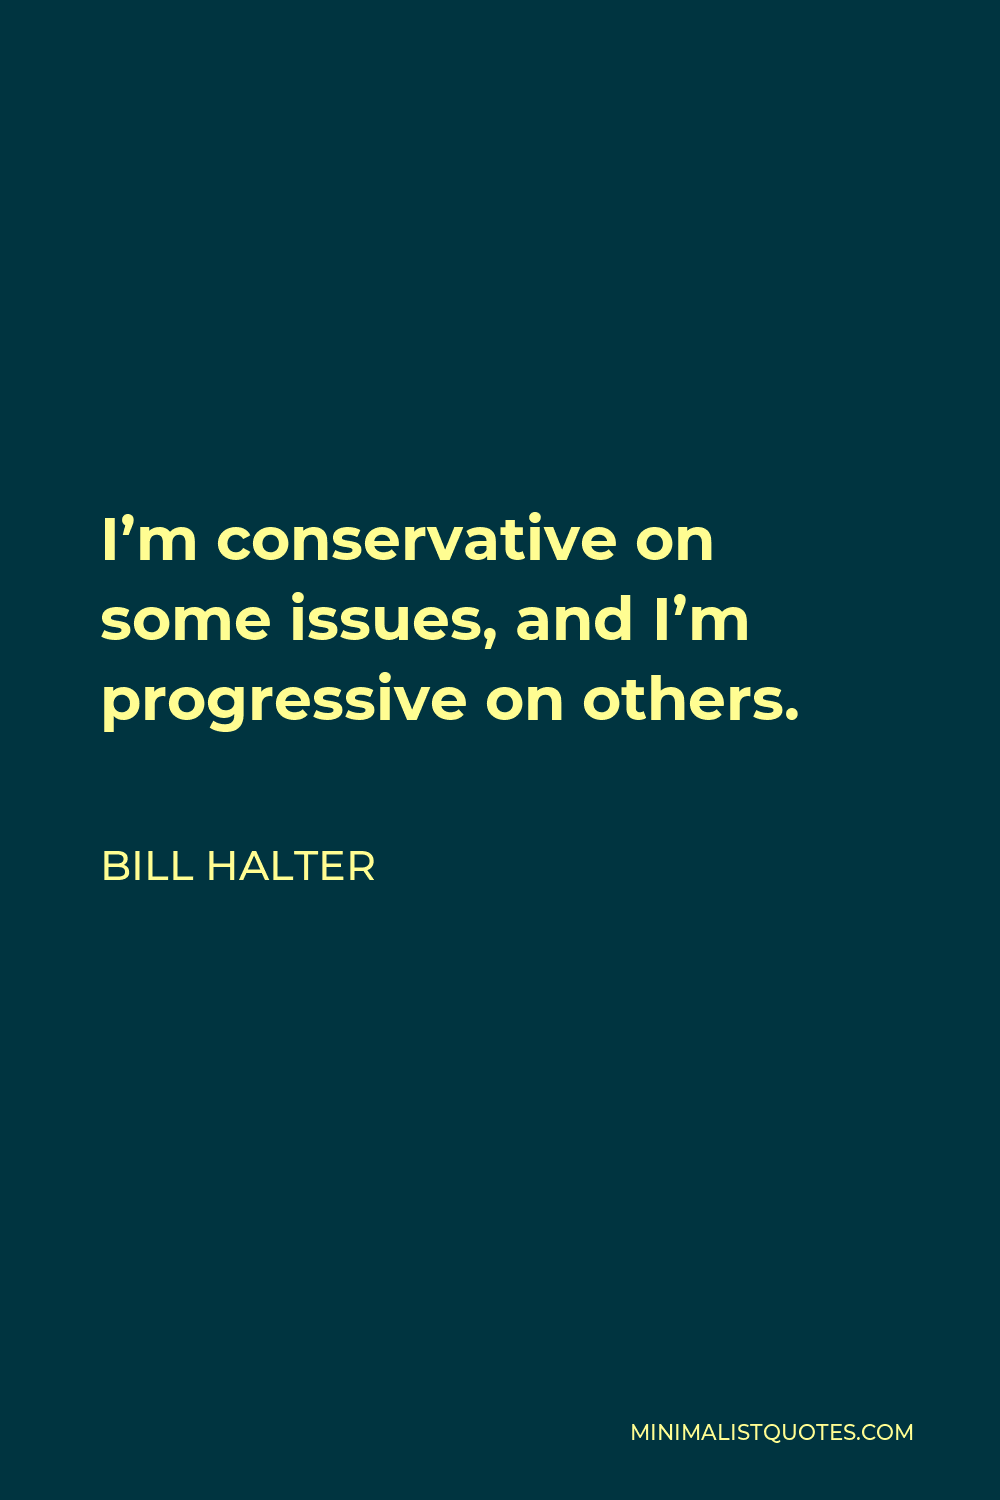 Bill Halter Quote - I’m conservative on some issues, and I’m progressive on others.